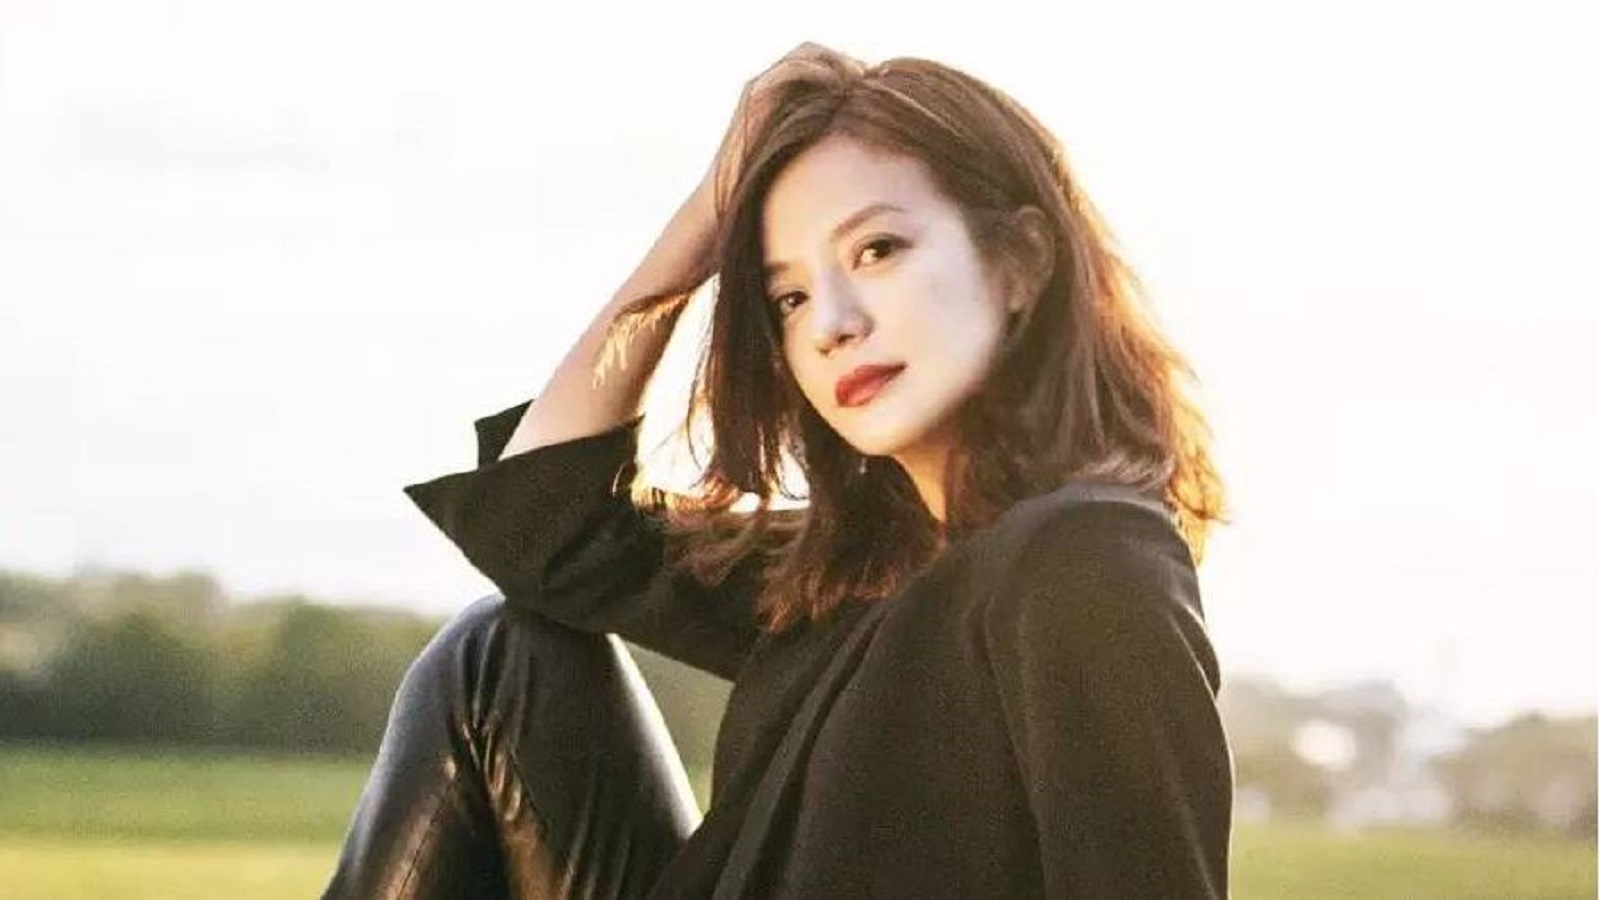 Wouldn't you like to be with Zhang Ziyi? Zhao Wei's temporary absence from the fashion film festival has long been a bitter hatred between them.